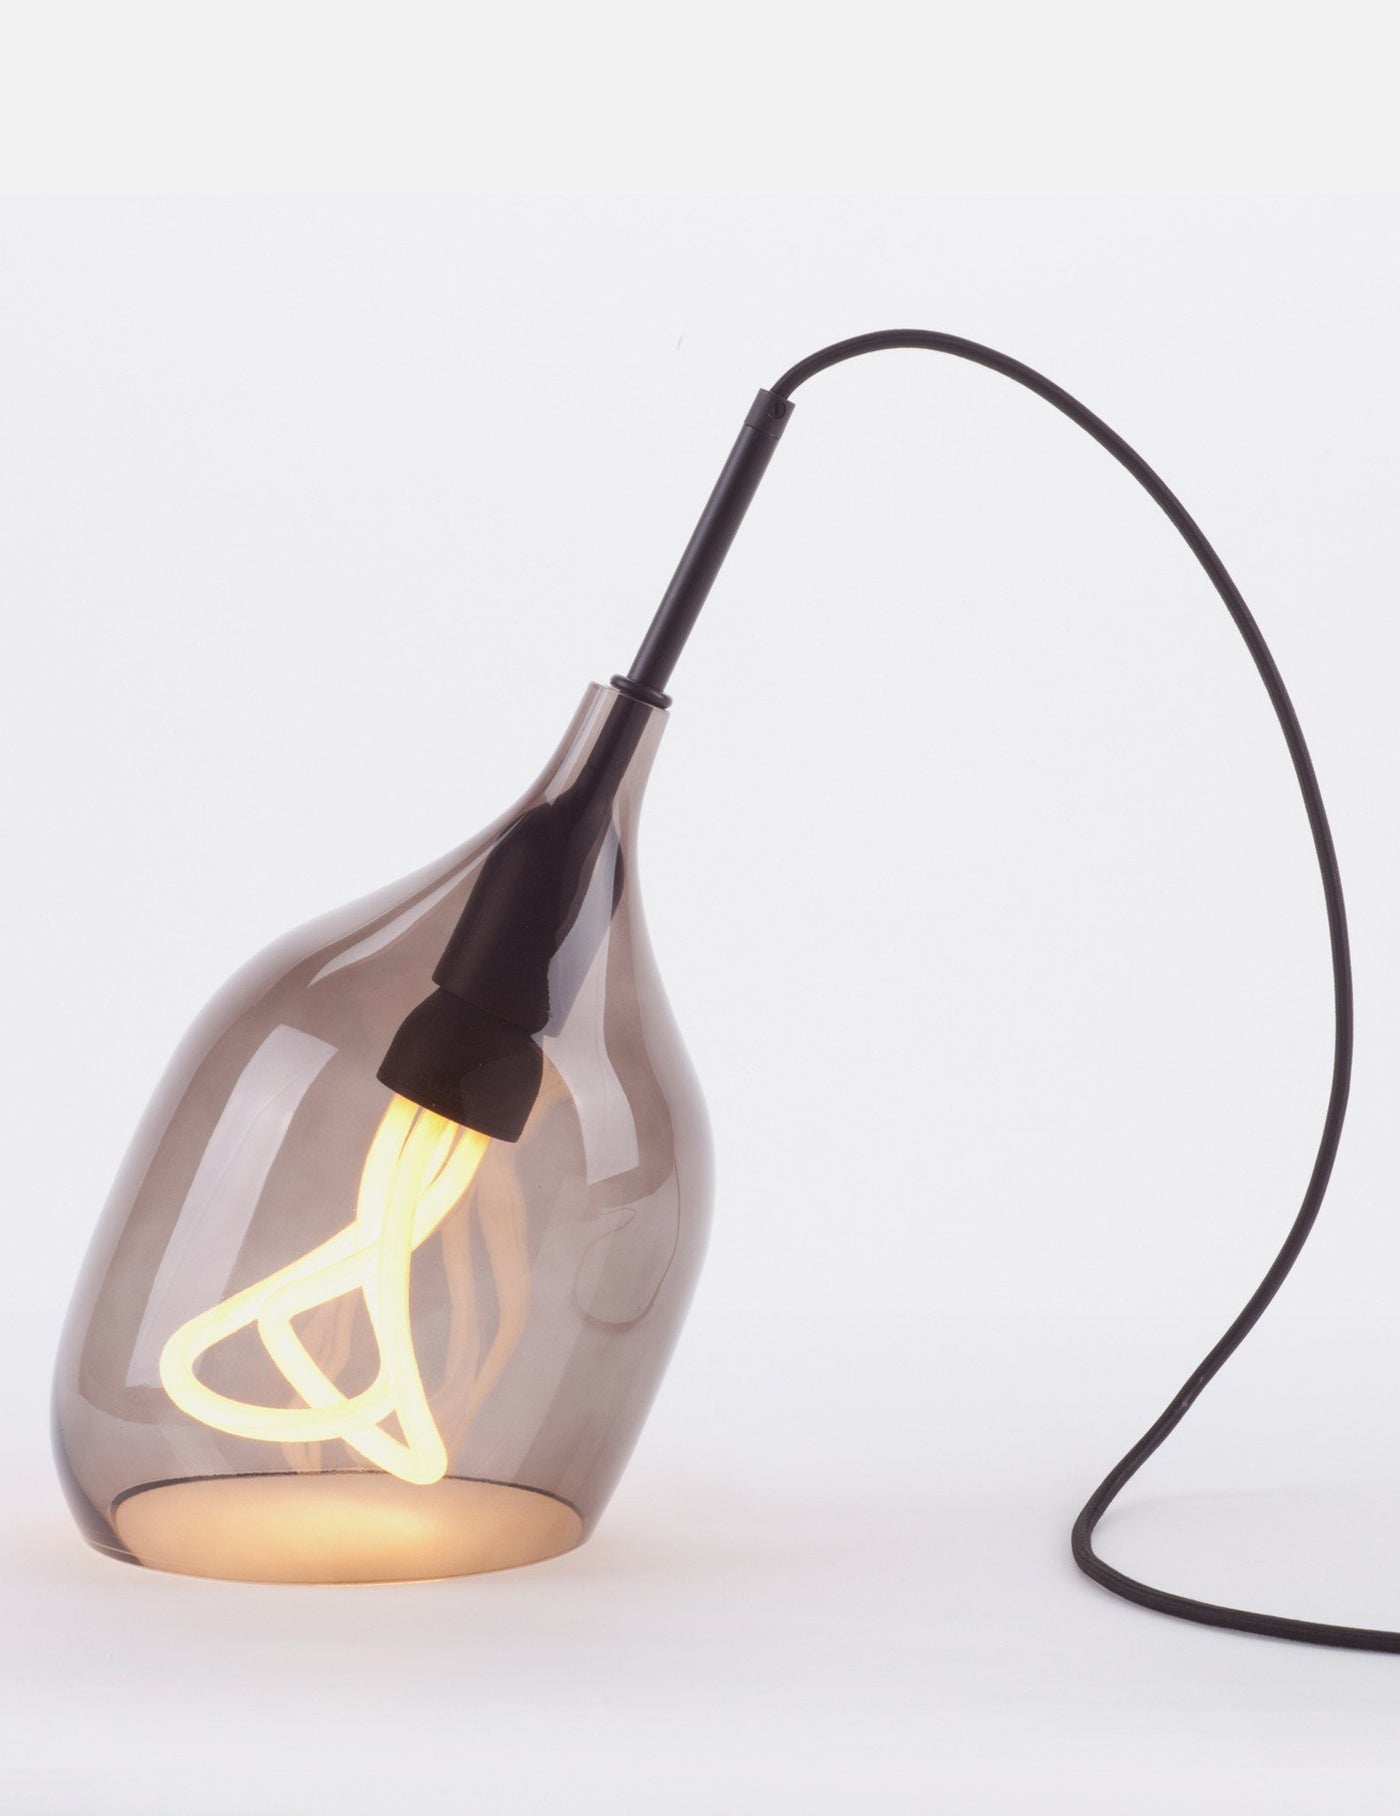 Vessel Lamp Shade - Table - Grey Glass with Plumen 001 Bulb E26